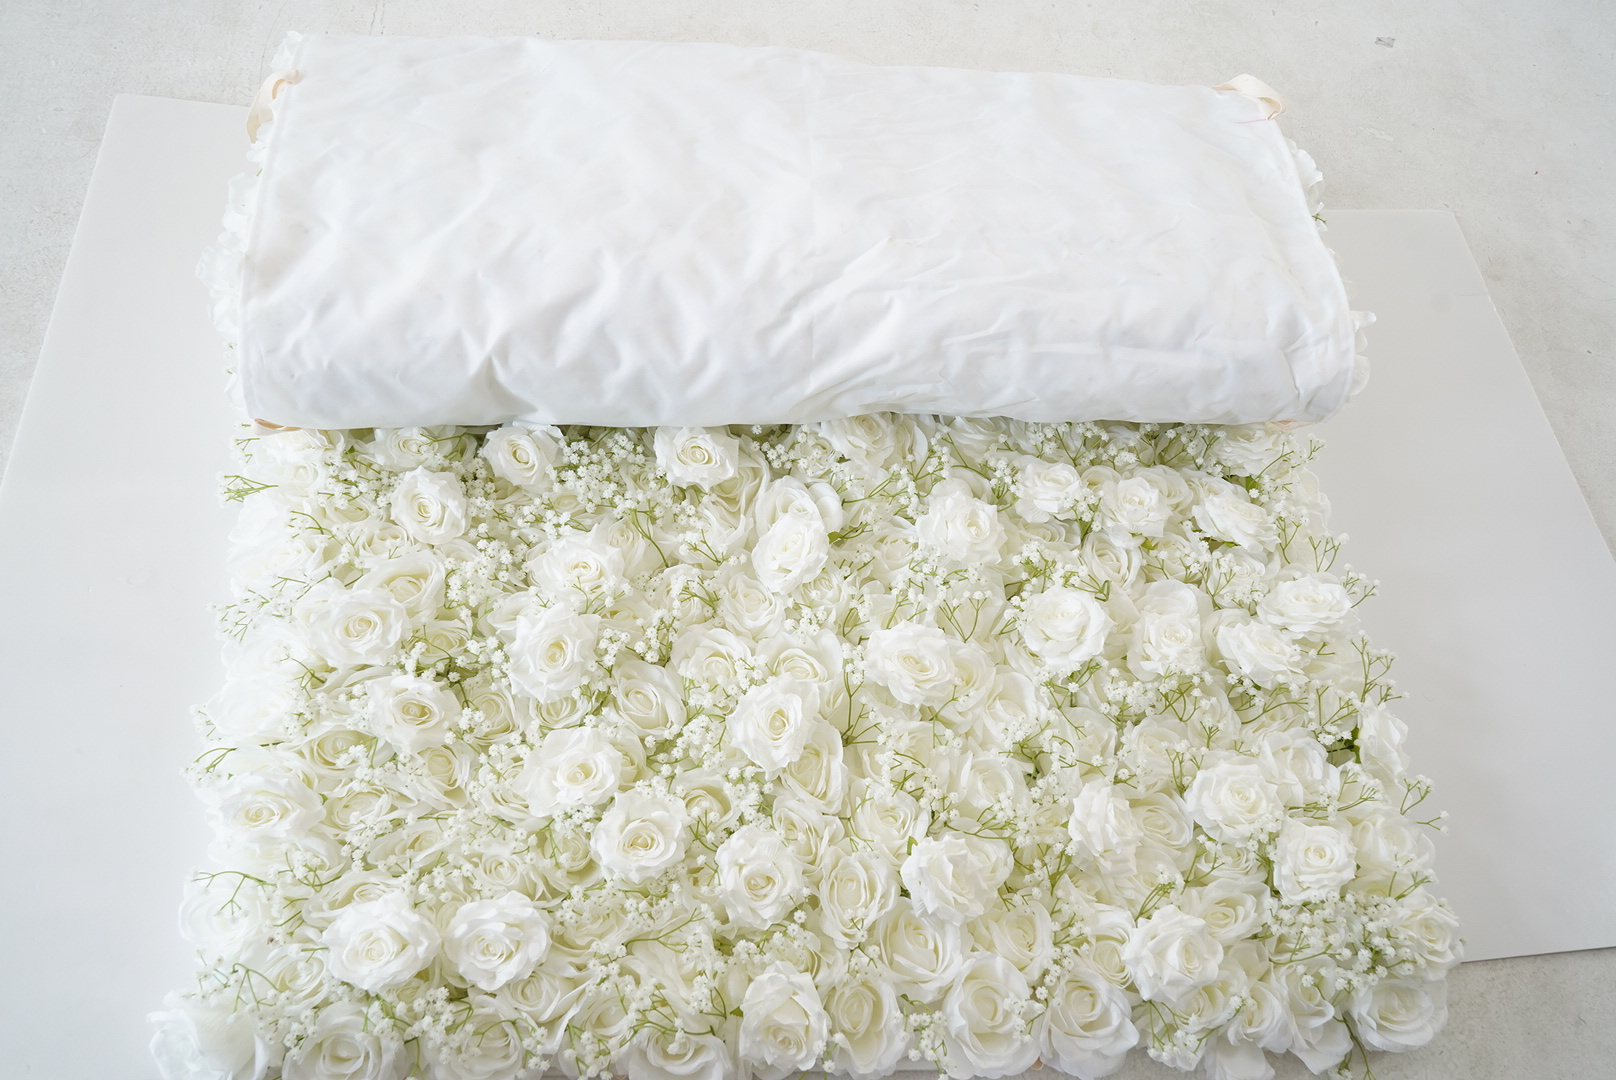 Flower Wall Baby Breath & Pure White Rose Fabric Rolling Up Curtain Floral Backdrop Wedding Party Proposal Decor